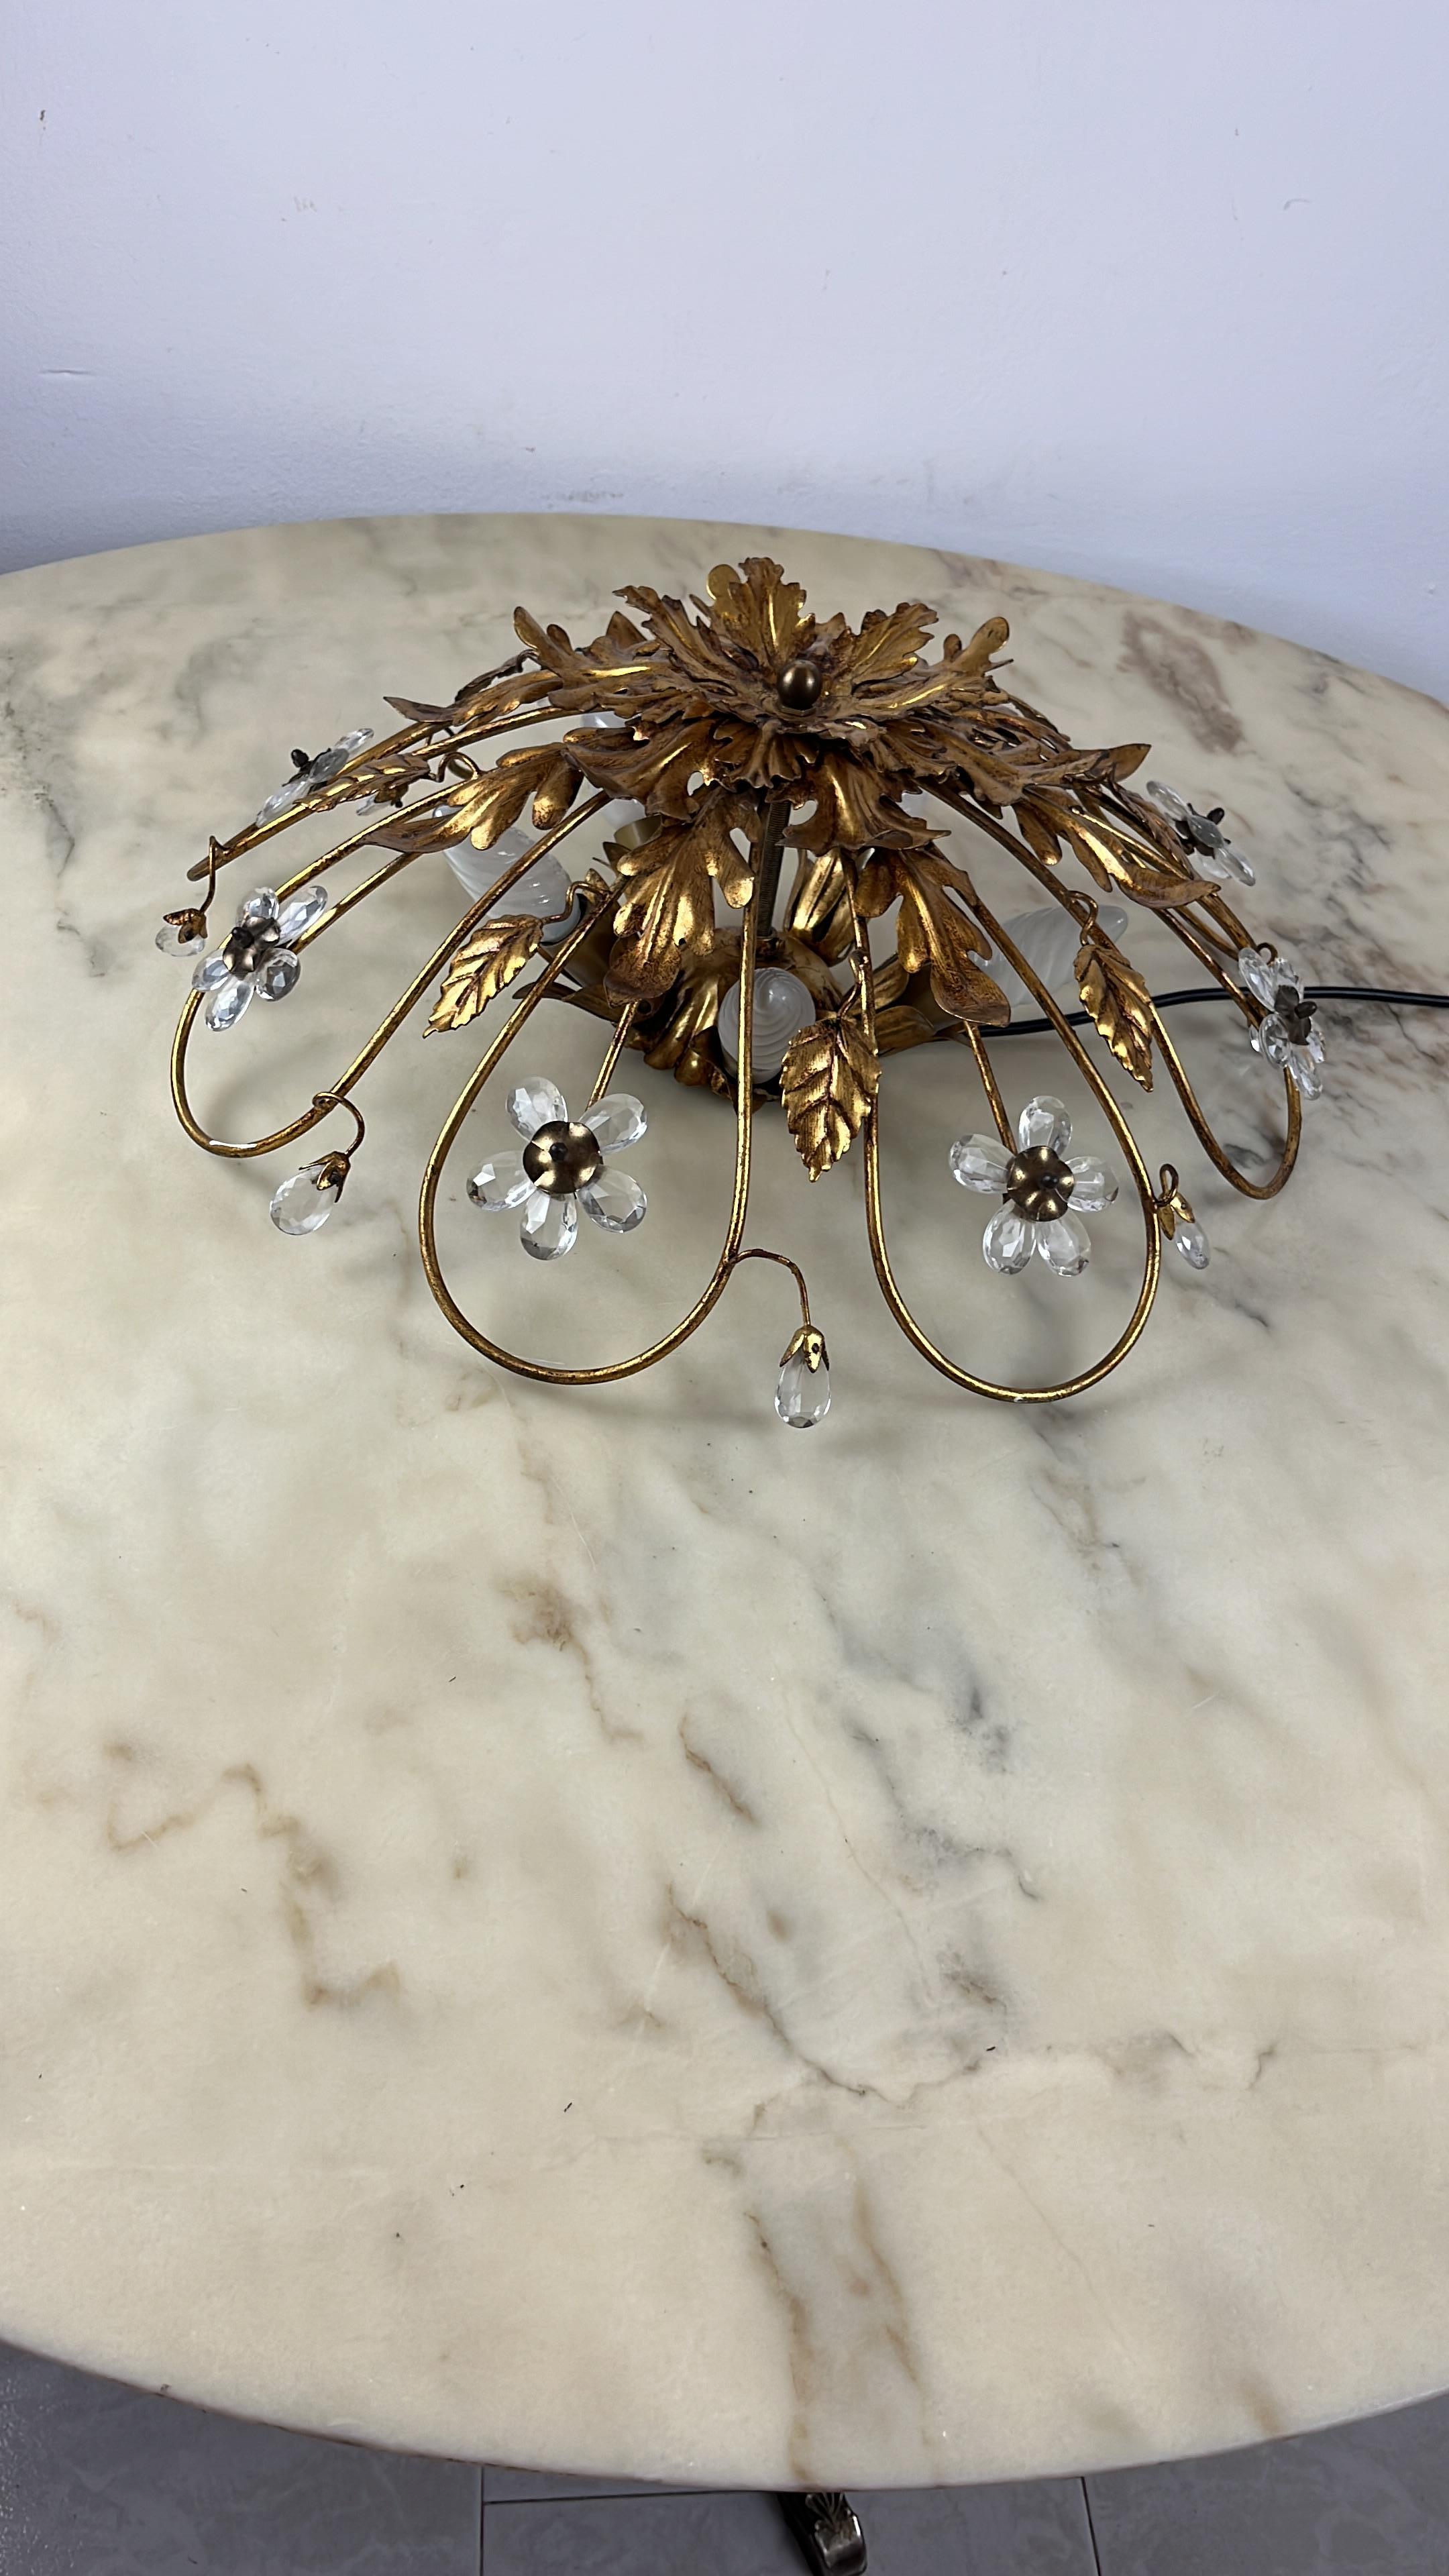 Banci Ceiling Light in Gilded Iron and Crystal Flowers Italian Design 1980s For Sale 6